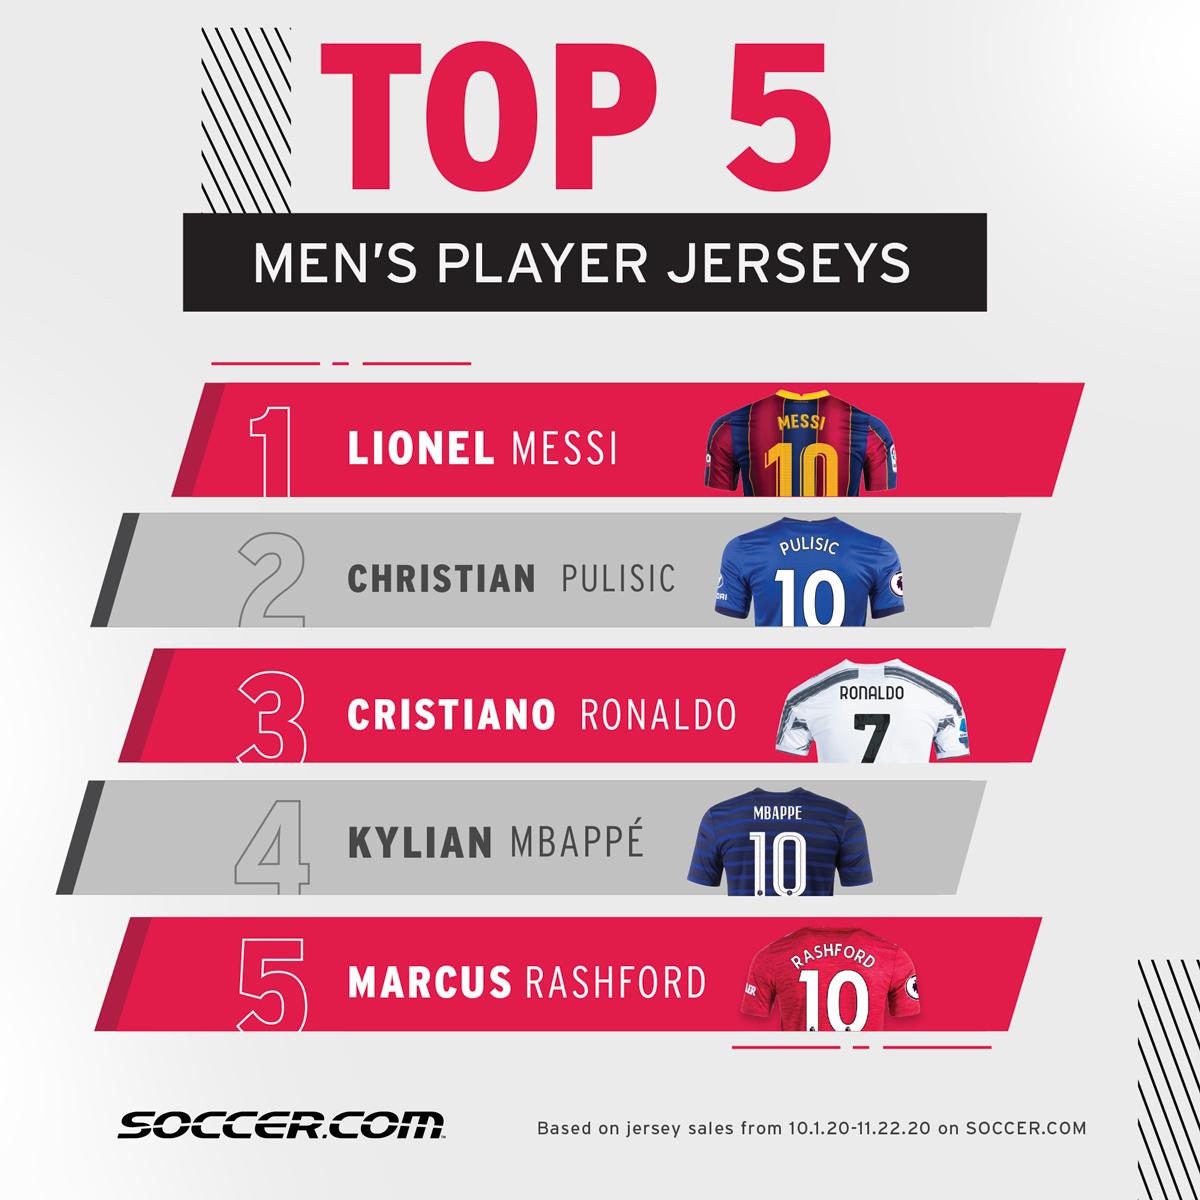 Where are people buying affordable jerseys these days? : r/ussoccer